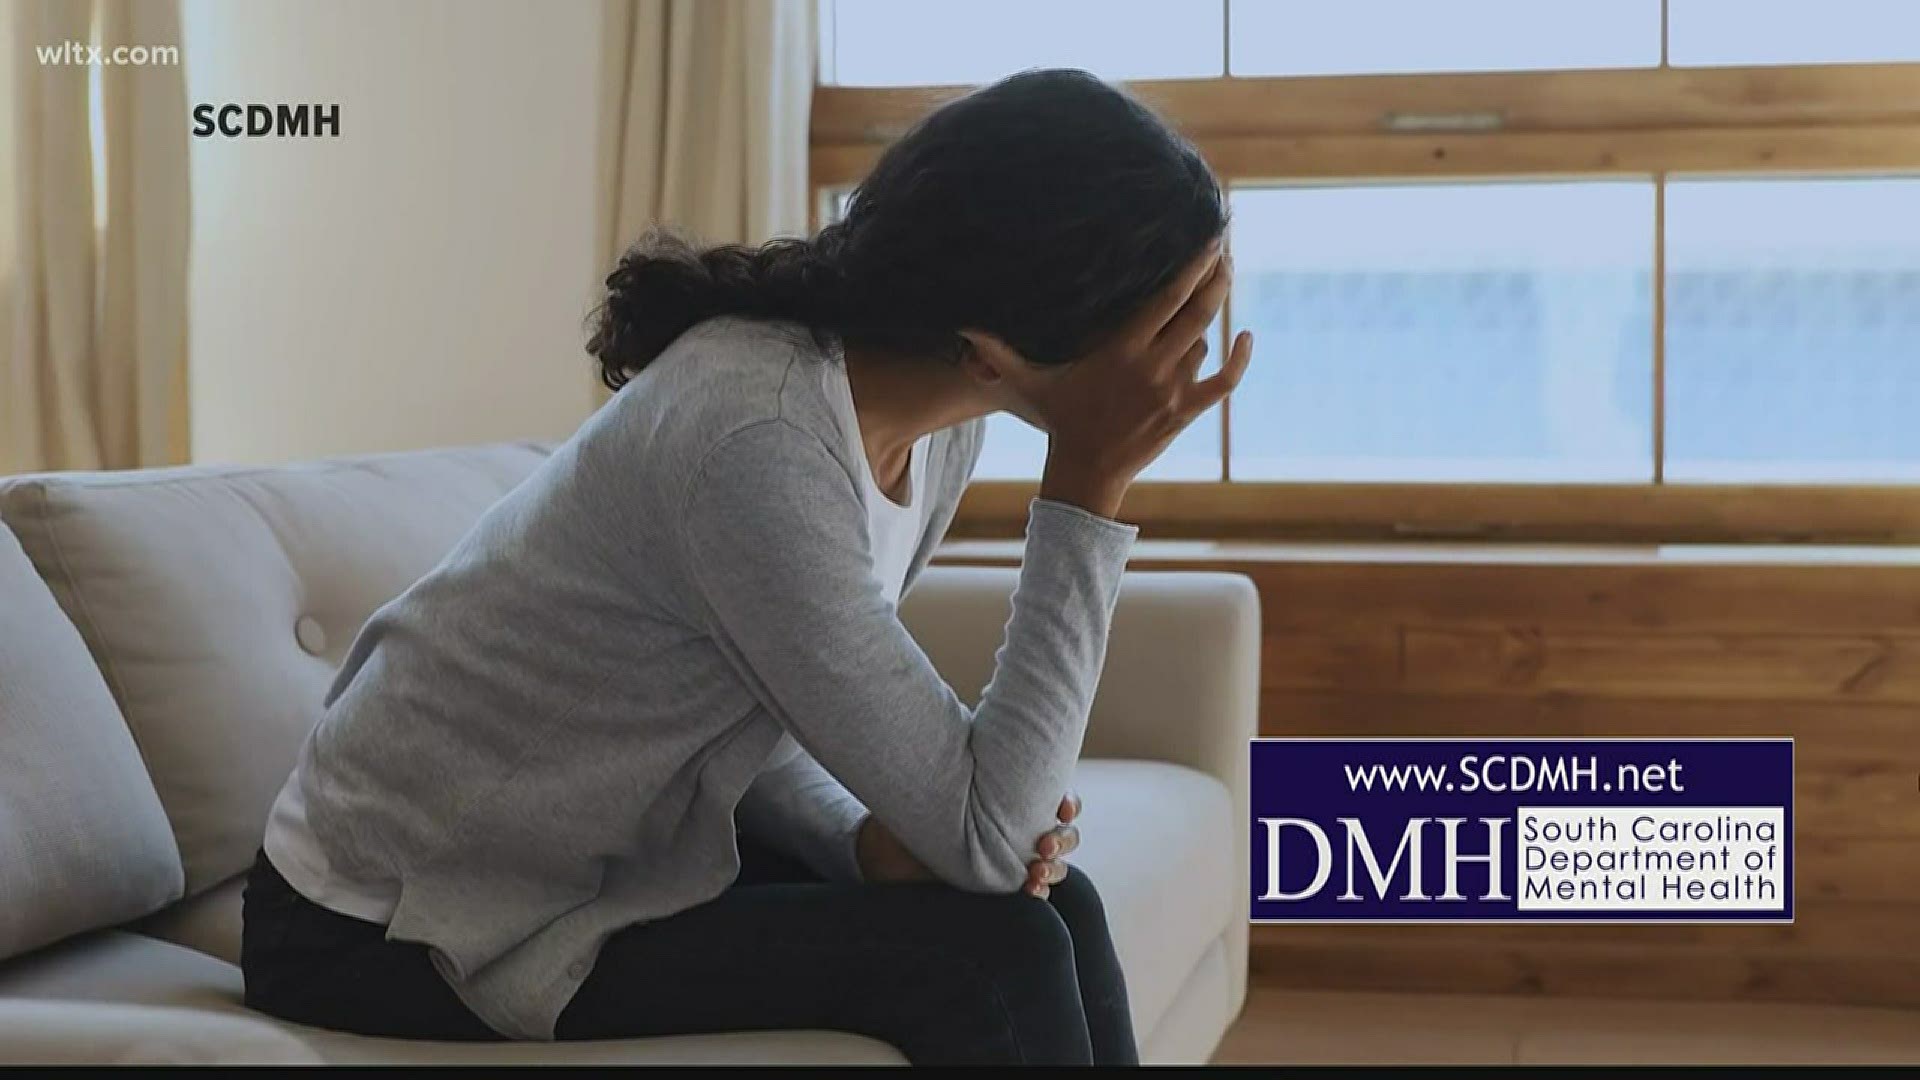 As the COVID-19 pandemic keeps people at home, licensed counselors want to make sure that you are taking care of your mental health.